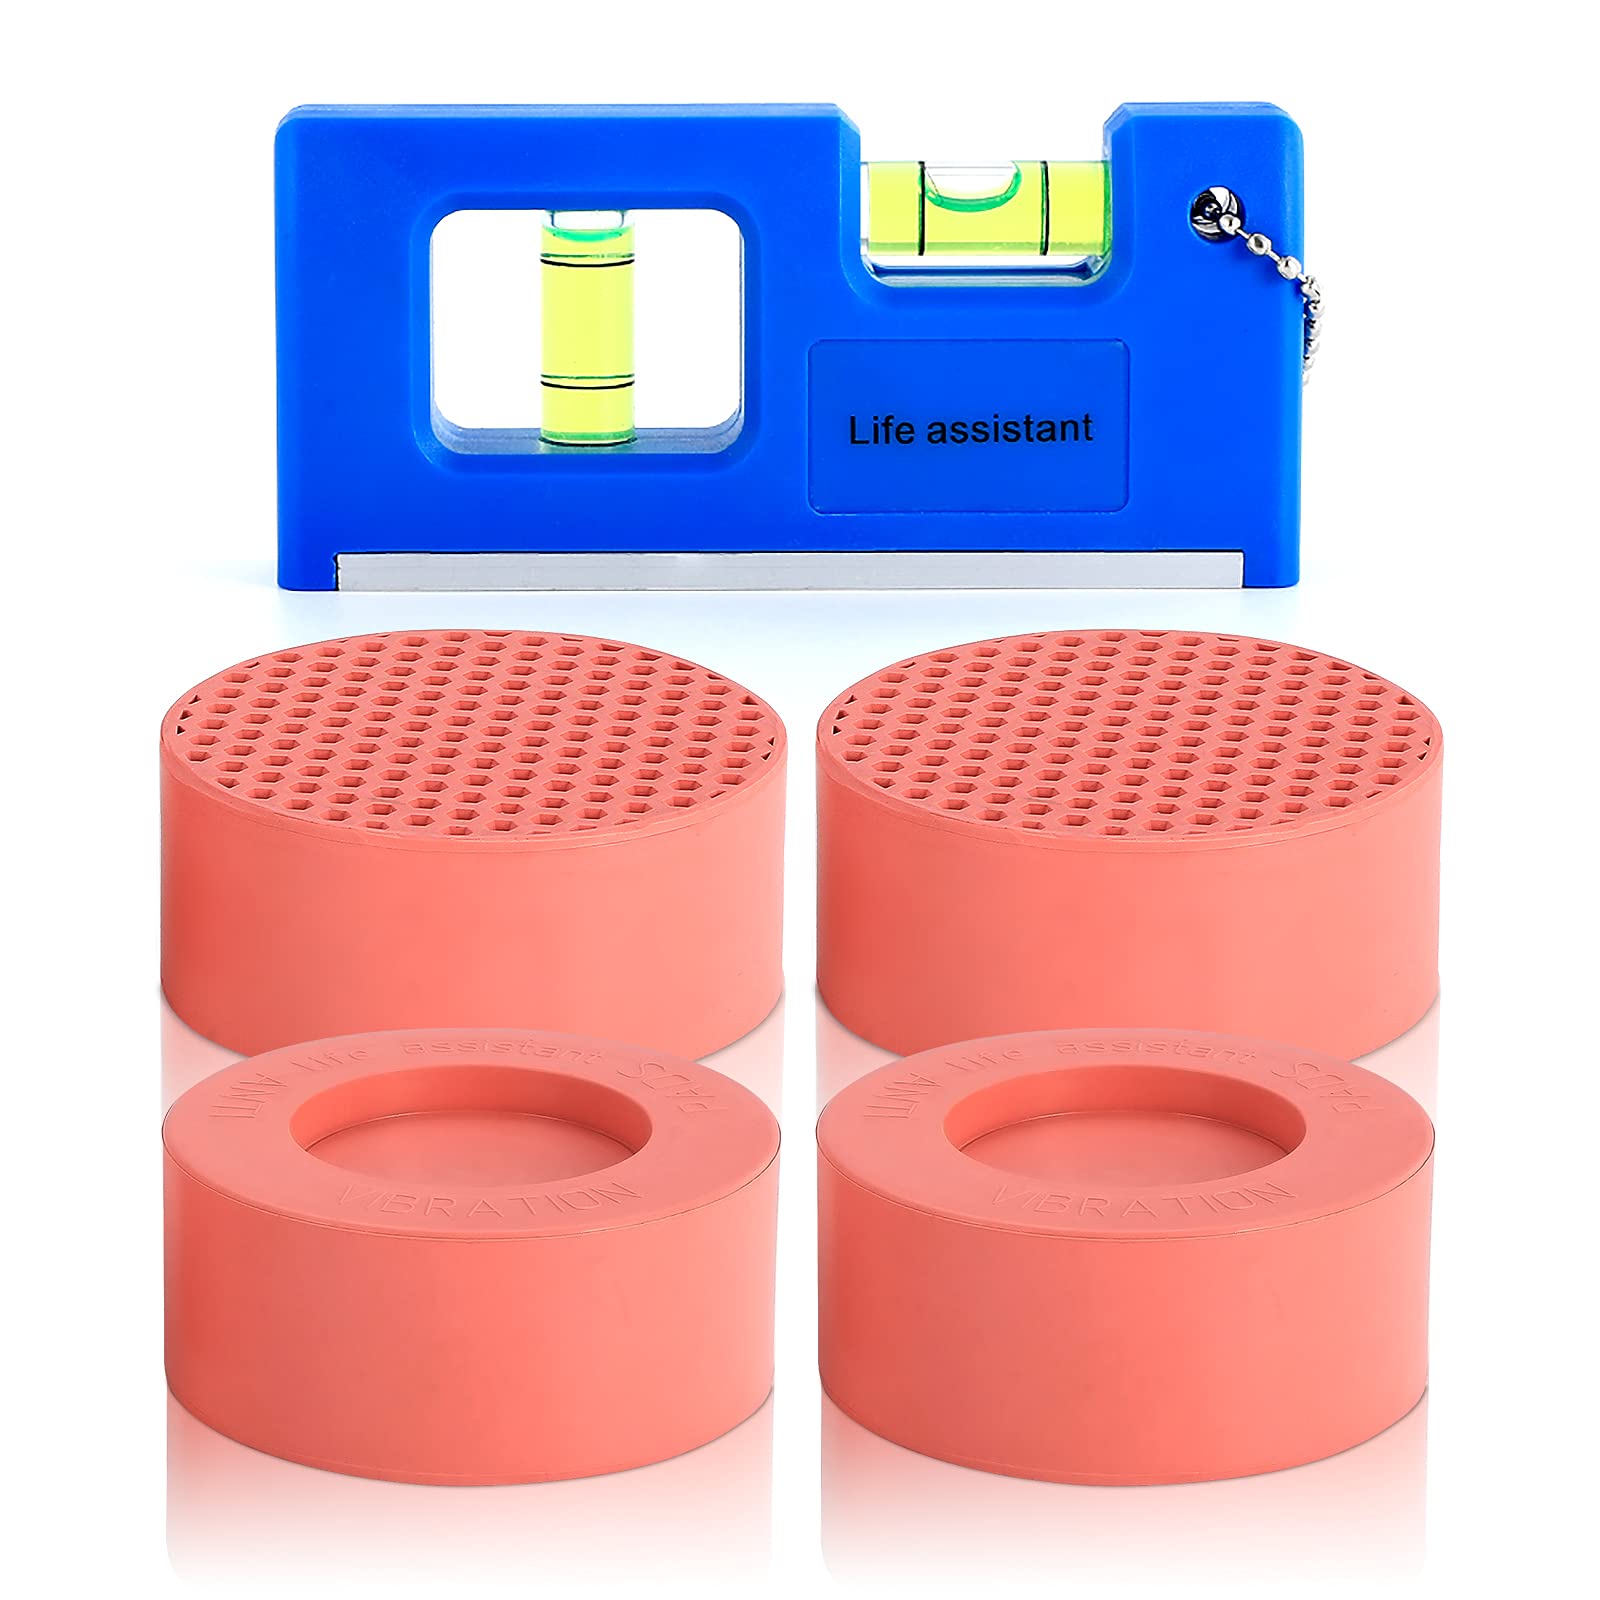 Anti Vibration Pads for Washing Machine, Noise Dampening Non-Slip Support Feet Stabilizer Mat Washer Dryer Appliance Fit All Machines, Protects Laundry Room Floor, 4 Pink Anti Vibrasion Pads + Level